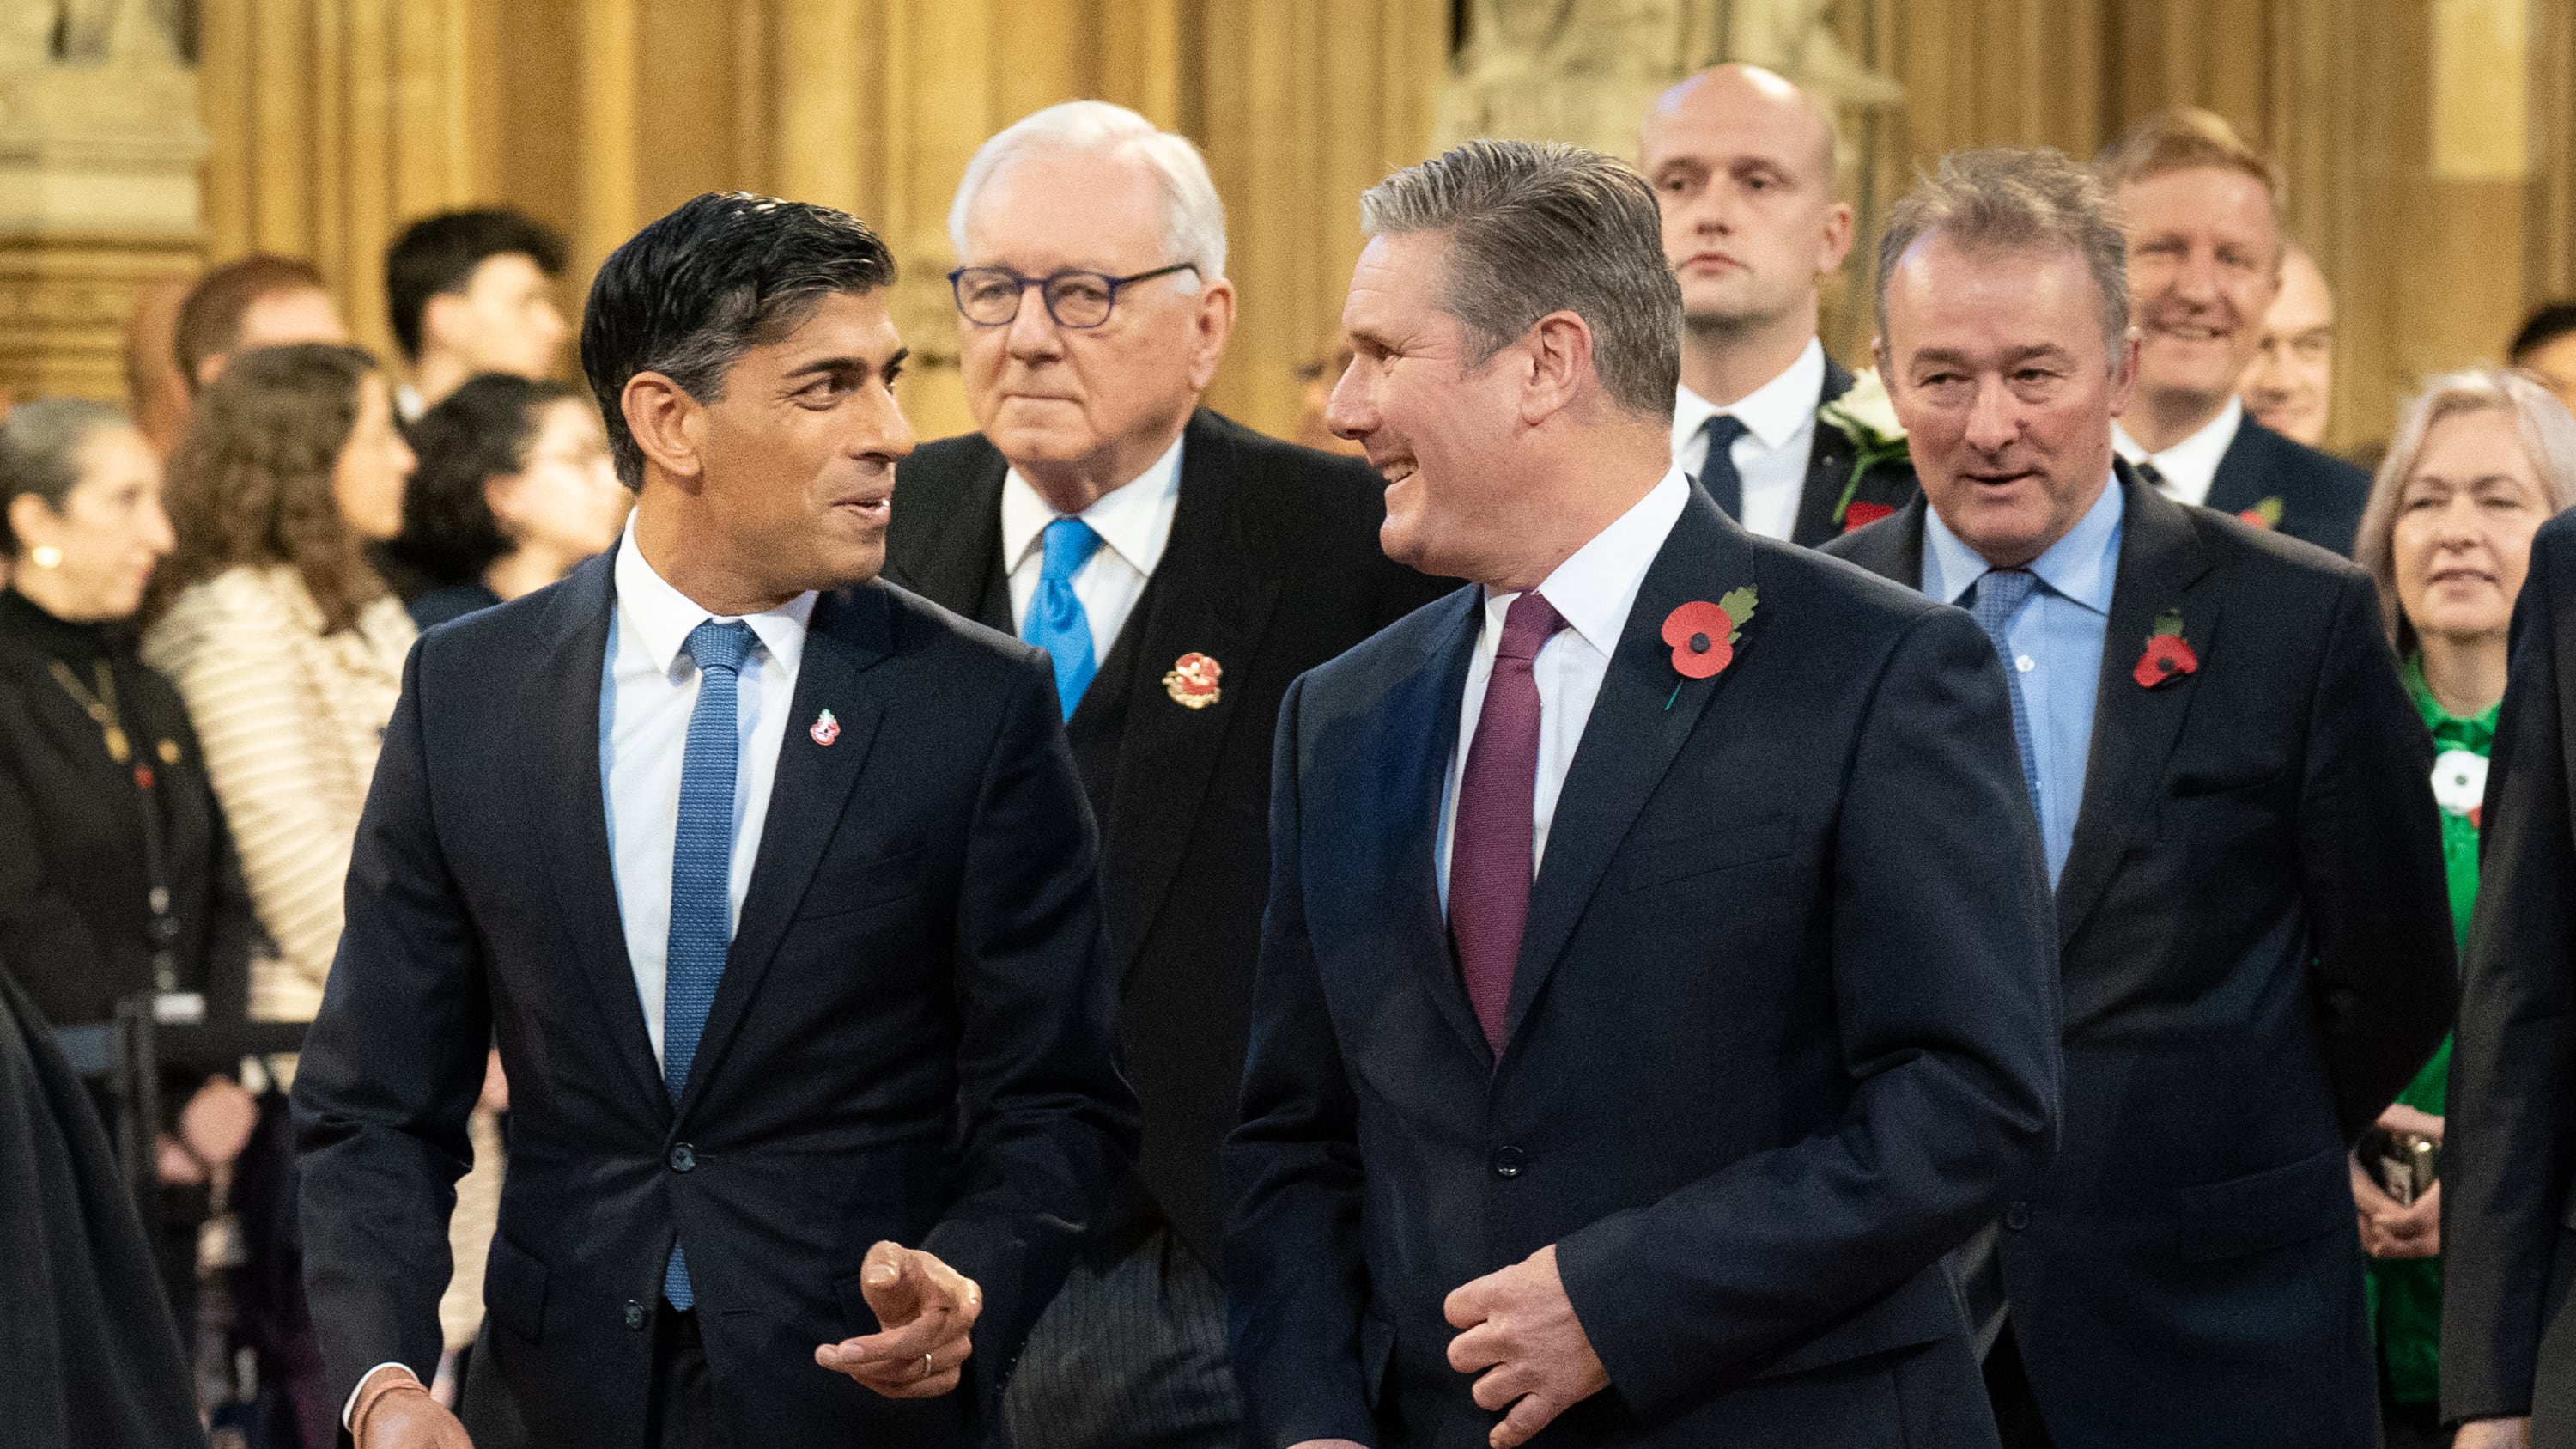 Labour Party leader Sir Keir Starmer and Prime Minister Rishi Sunak are expected to be guests at the Japanese state banquet